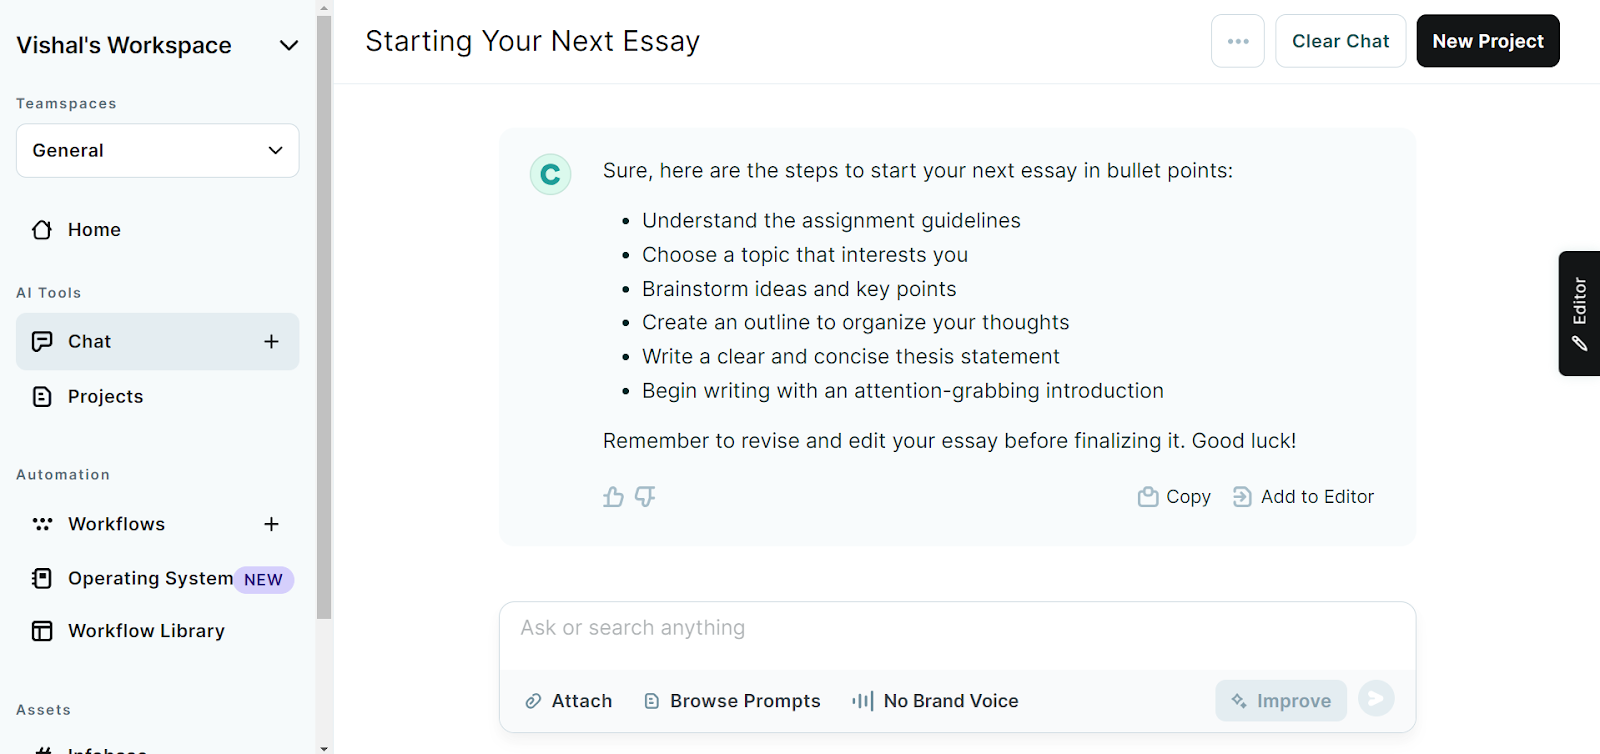 Essay writing service UK - professional writers providing high-quality essays for students by using Copy AI